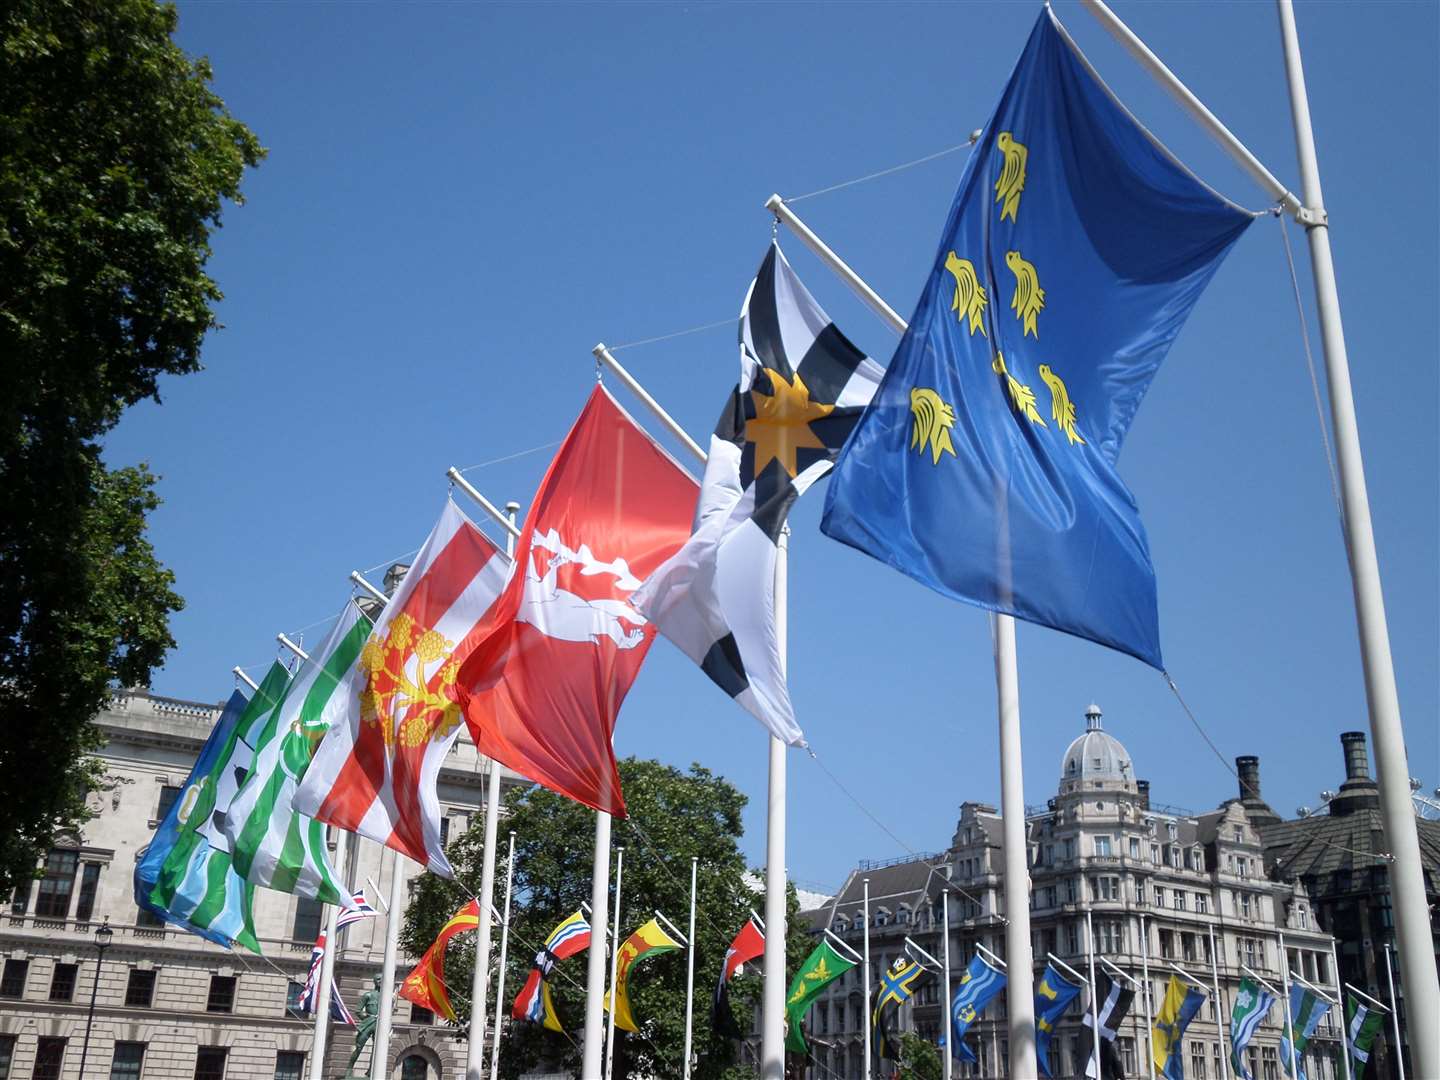 The distinctive Sutherland flag is second right.